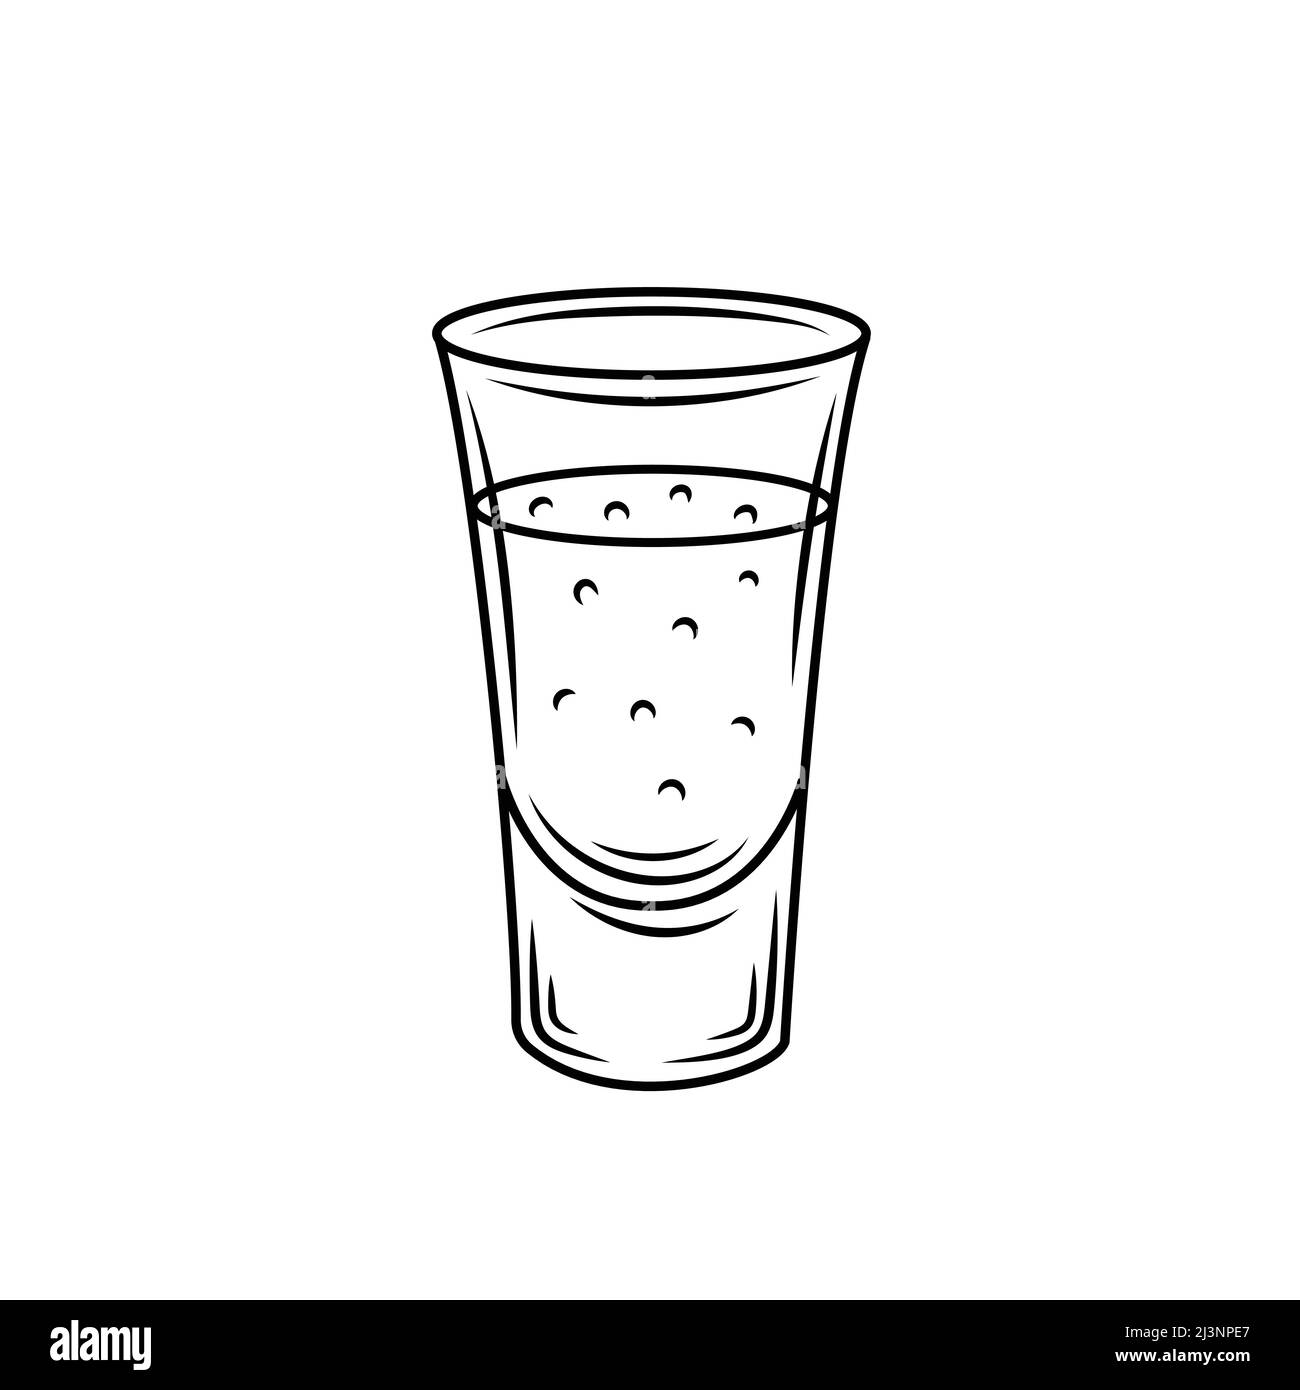 https://c8.alamy.com/comp/2J3NPE7/tequila-shot-glass-mexican-alcohol-drink-vector-drawing-sketch-of-shot-glass-cocktail-engraved-illustration-for-label-icon-bar-or-restaurant-2J3NPE7.jpg